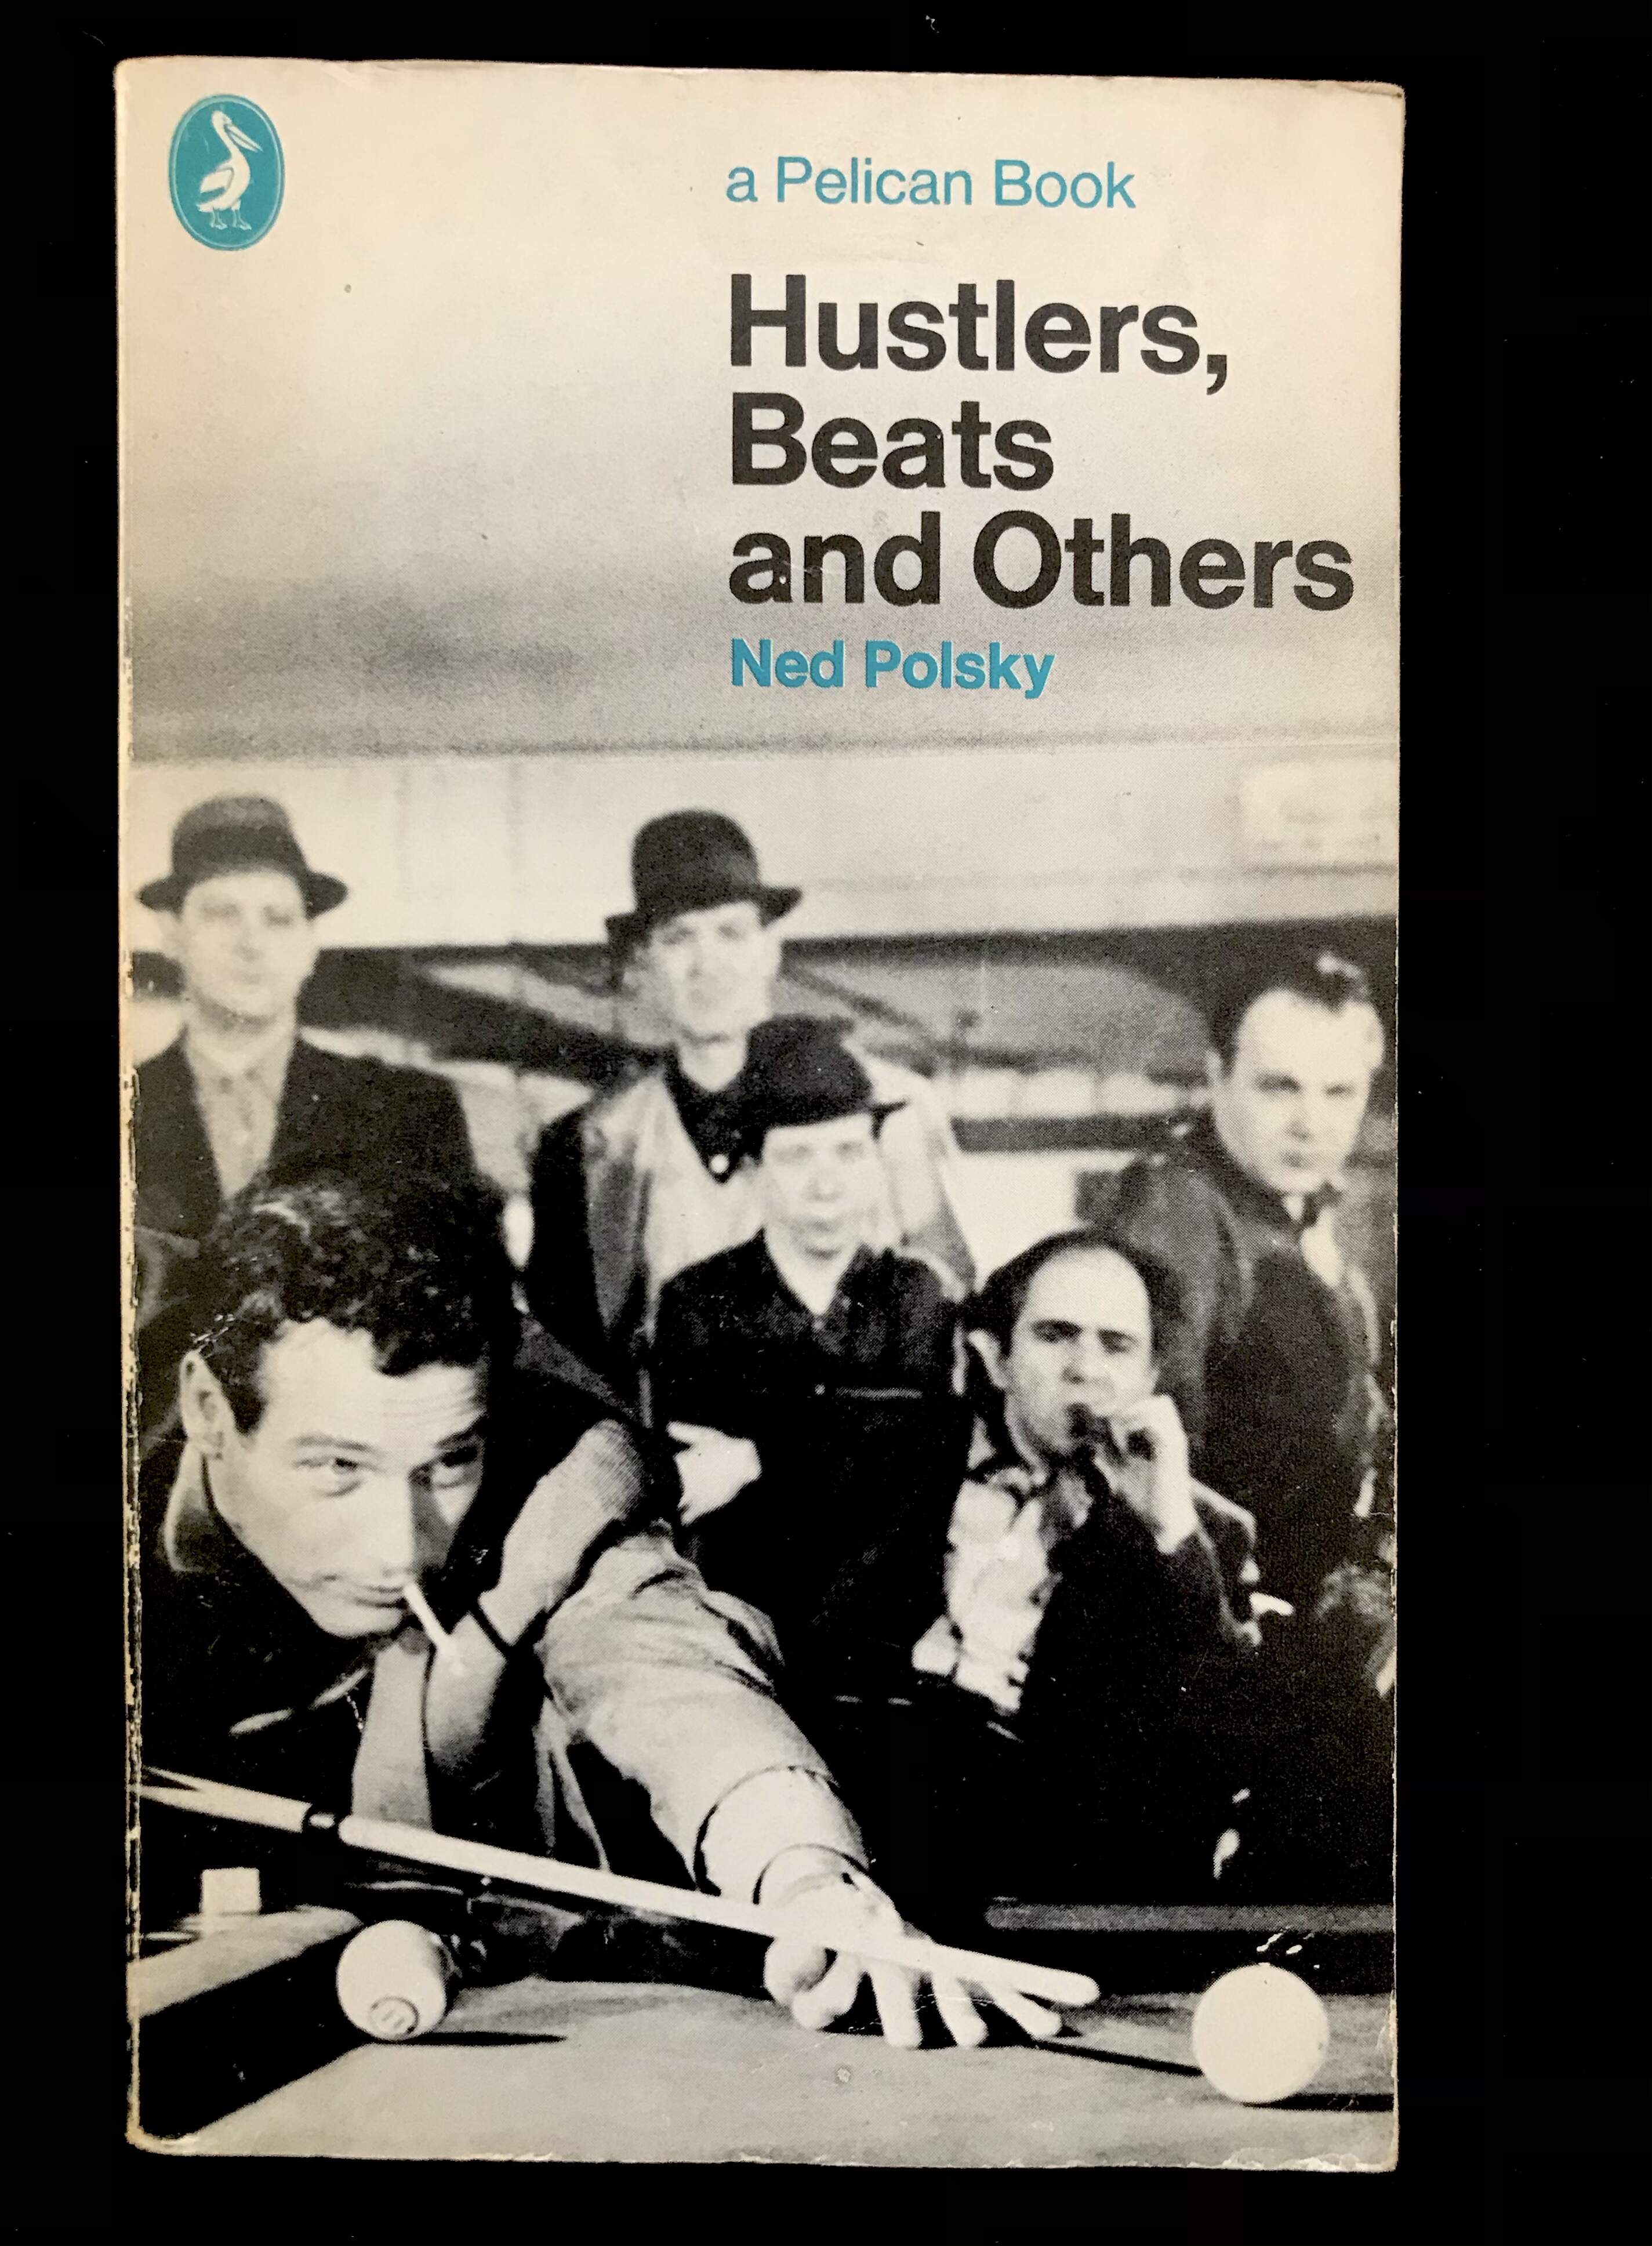 Hustlers, Beats and Others by Ned Polsky